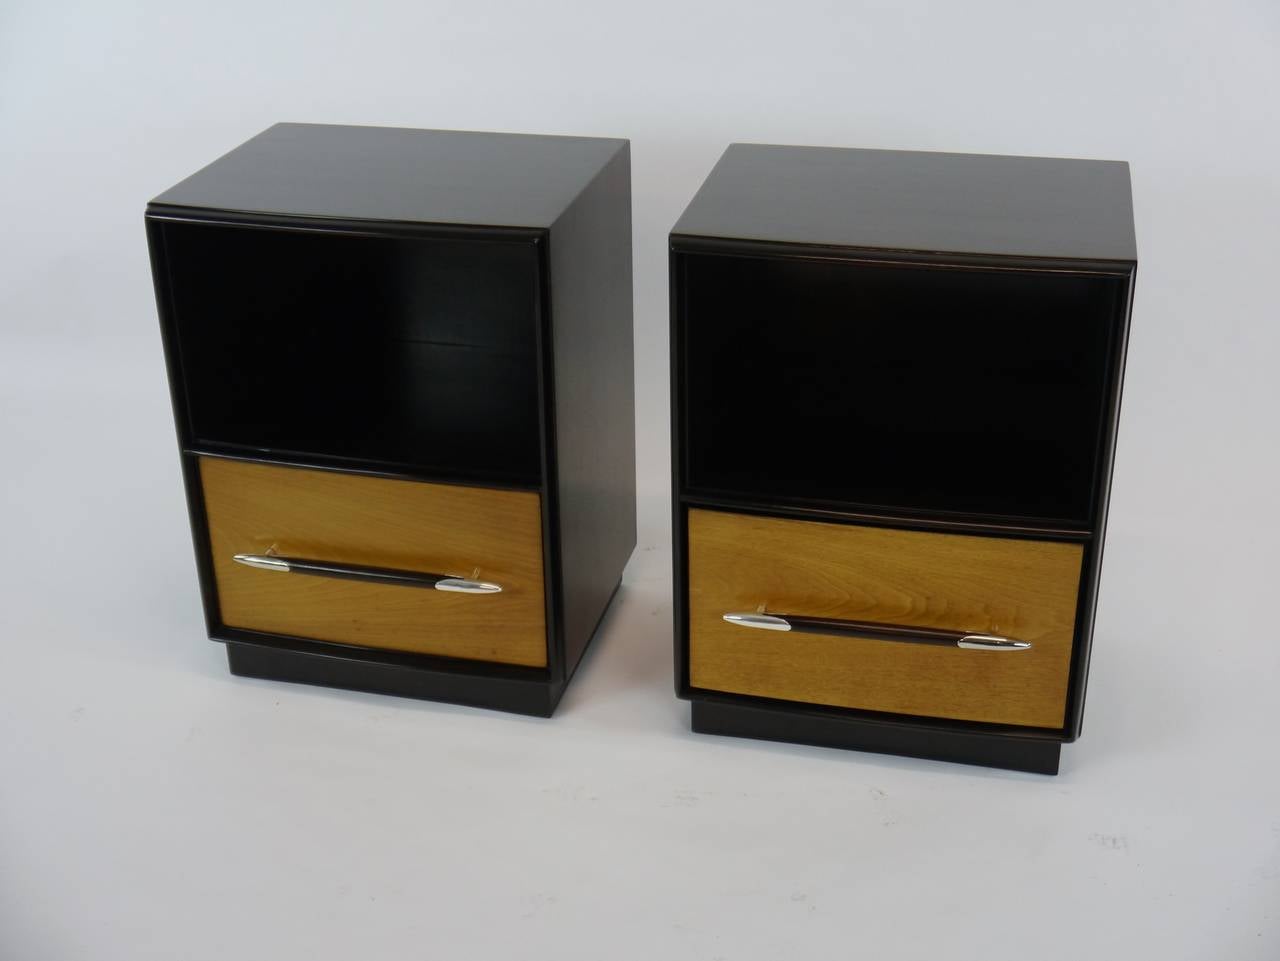 Tulip collection nightstands by T.H. Robsjohn-Gibbings for Widdicomb done in dark walnut and natural lacquer. The stave pulls have a gentle arch and are held on either end by silver plated 